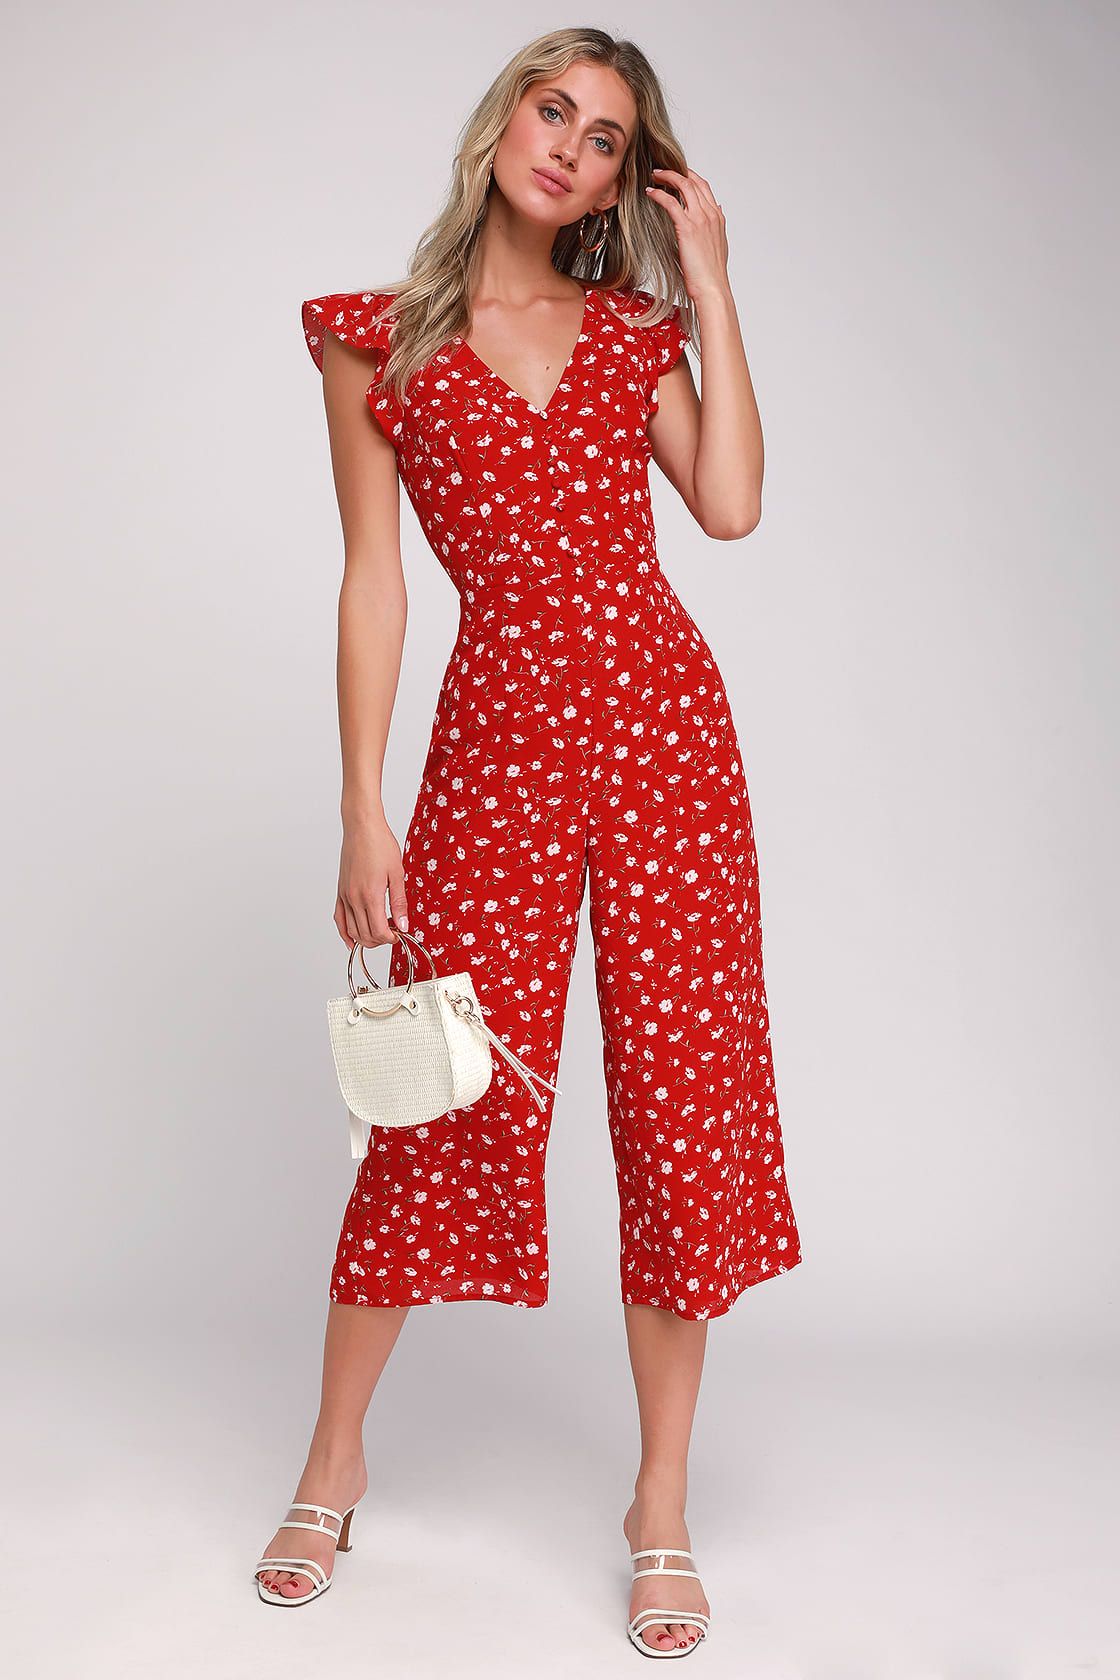 Floreal Love Red Floral Print Ruffled Culotte Jumpsuit | Lulus